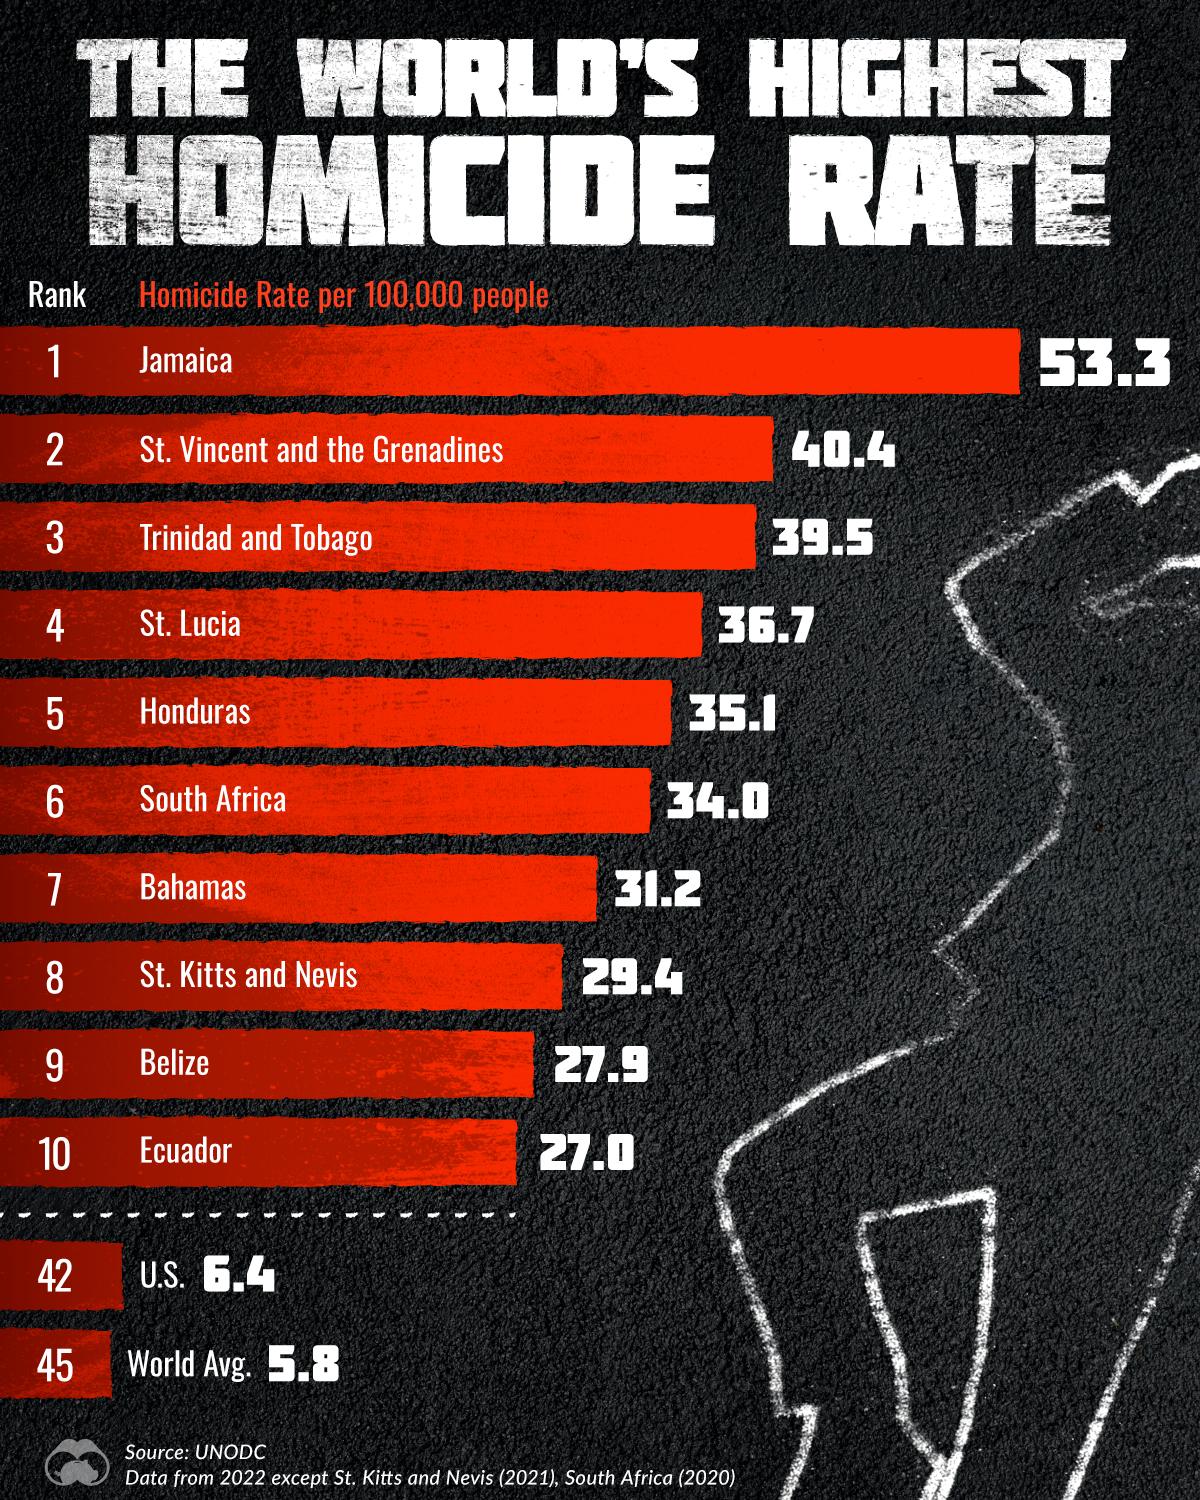 Countries with the Highest Homicide Rates